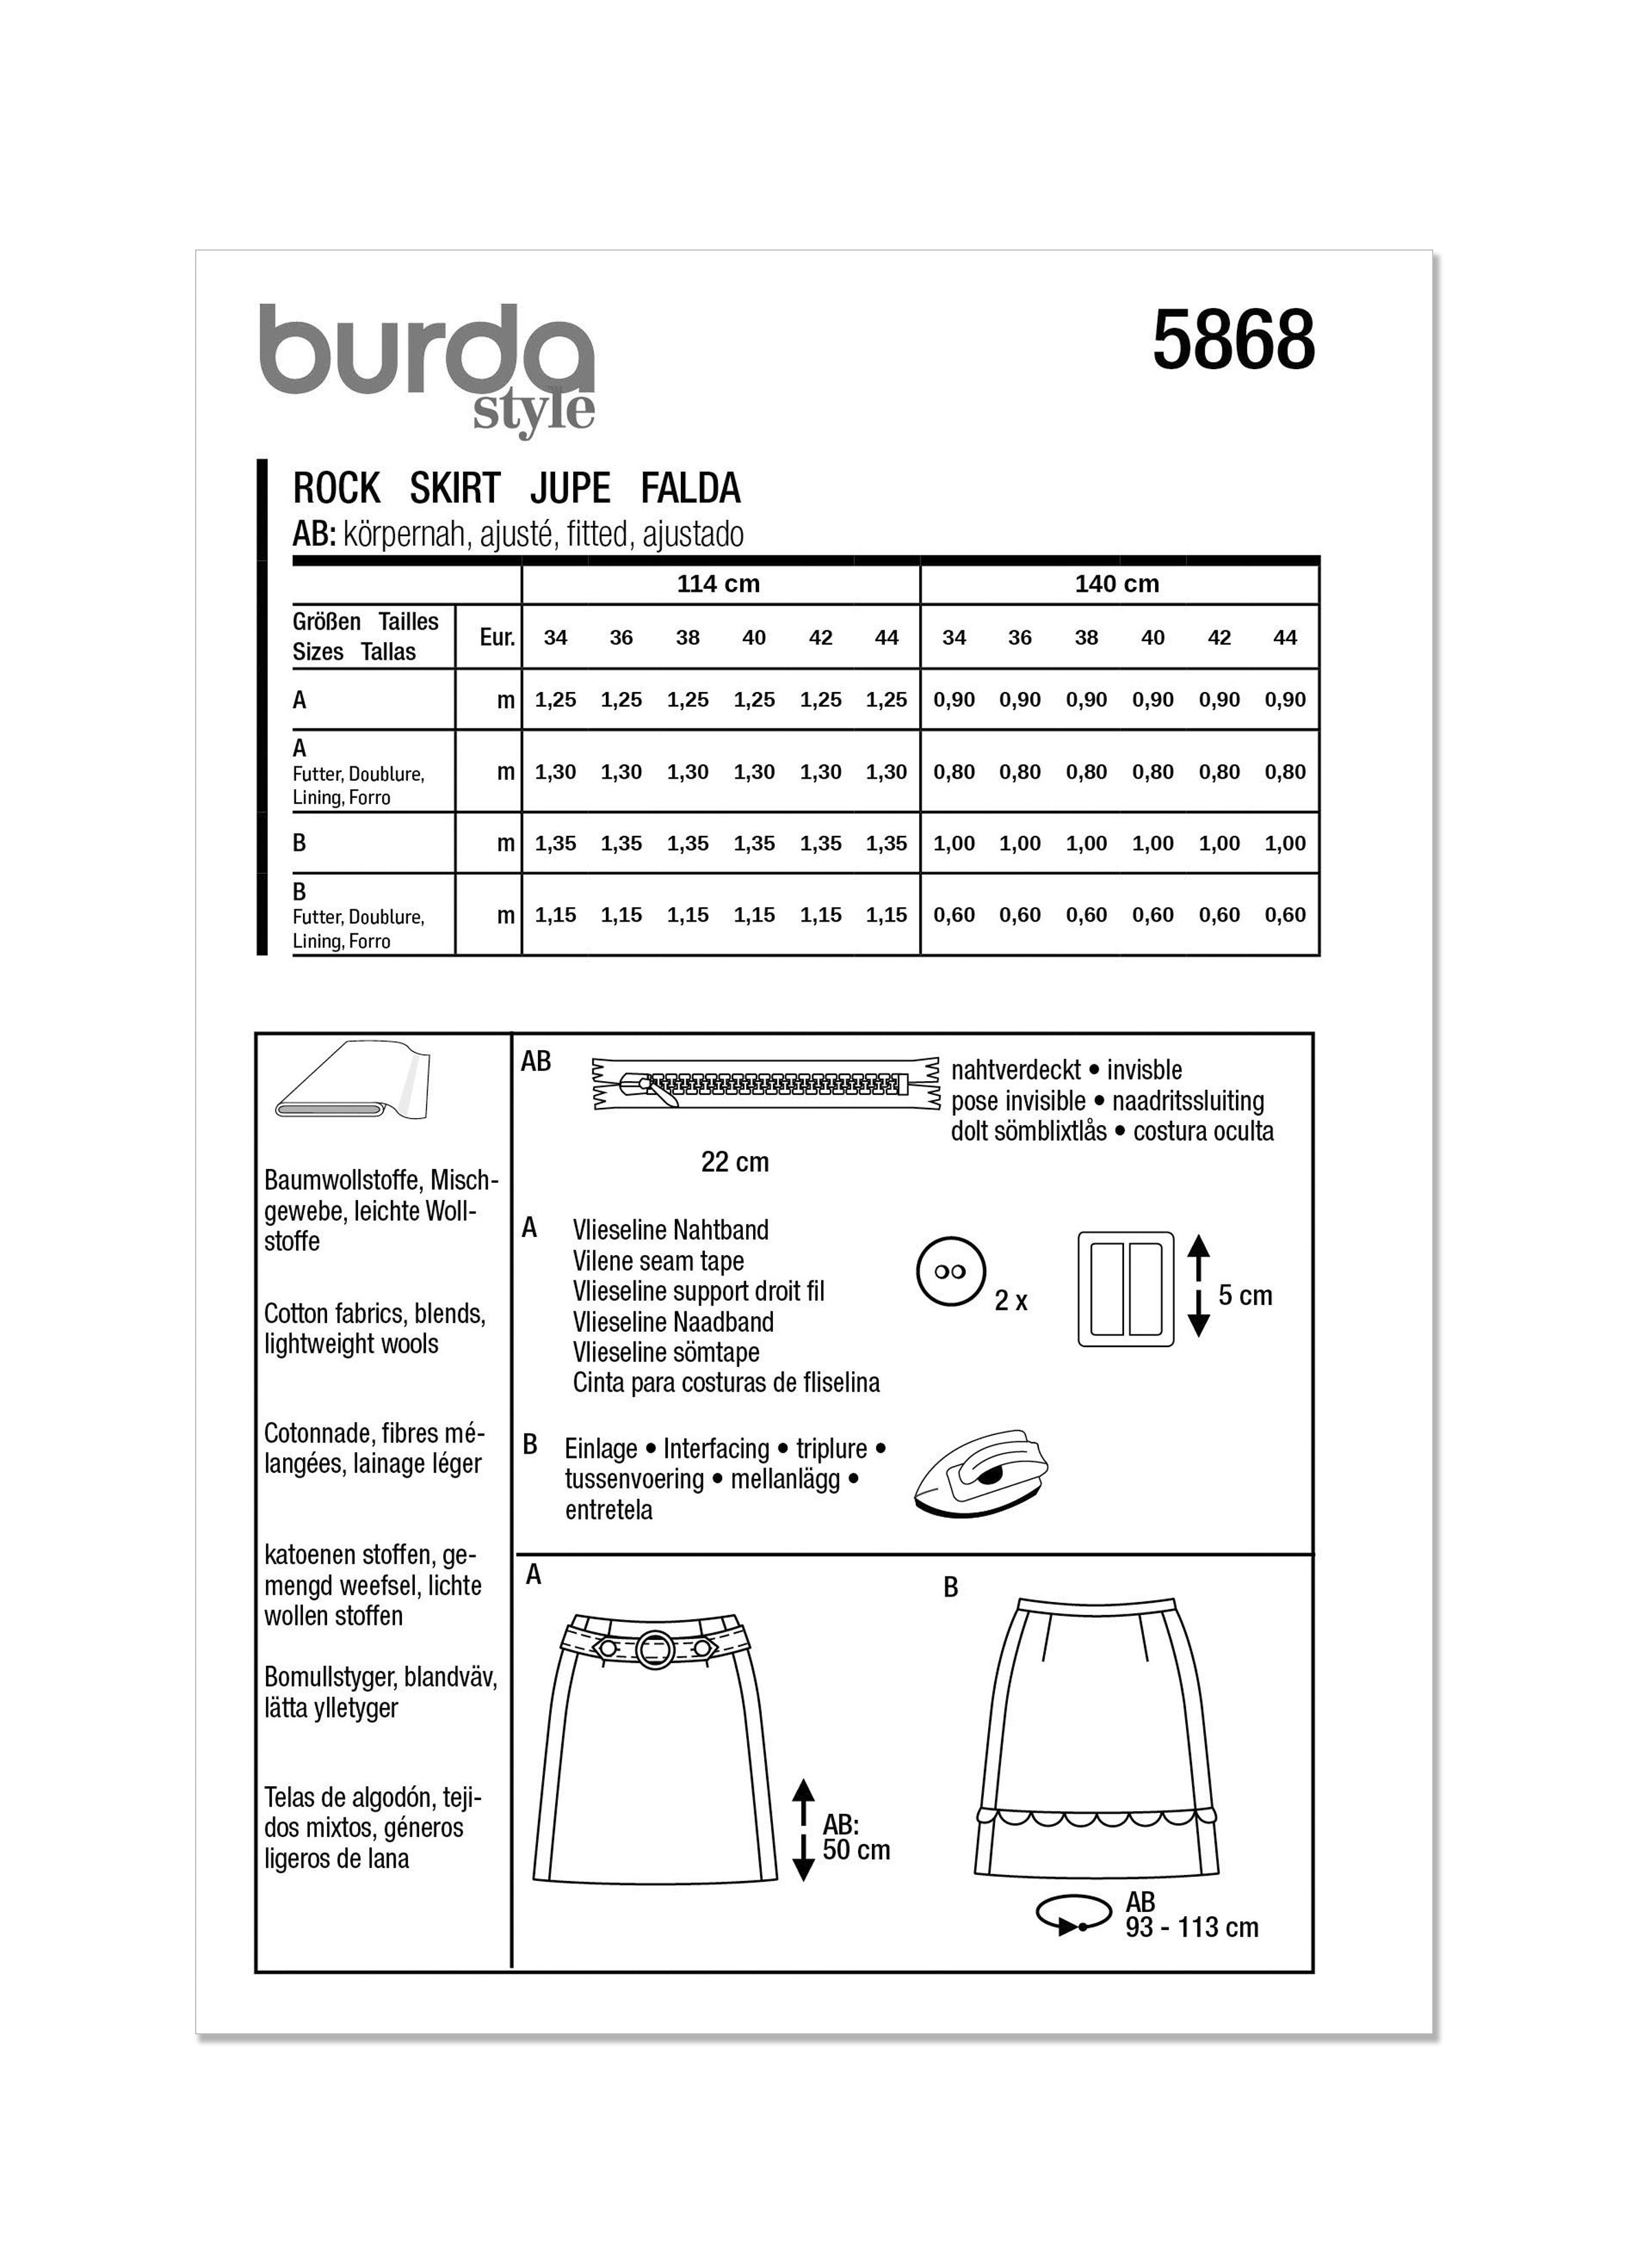 Burda Sewing Pattern 5868 Misses' Skirt from Jaycotts Sewing Supplies